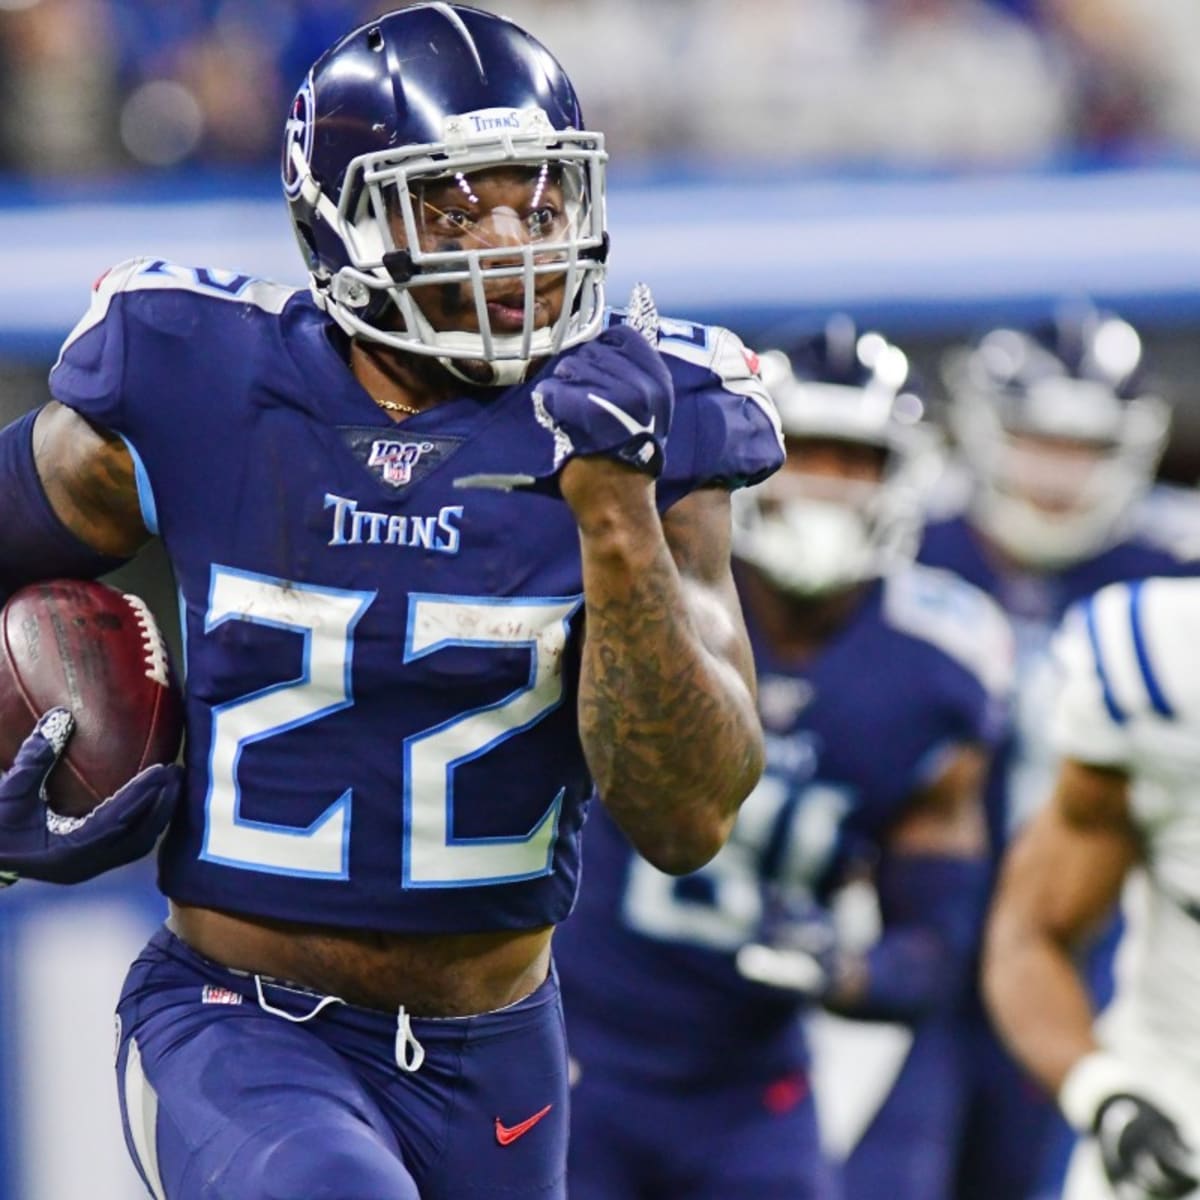 Titans' Henry is selective about his jersey swaps, Football